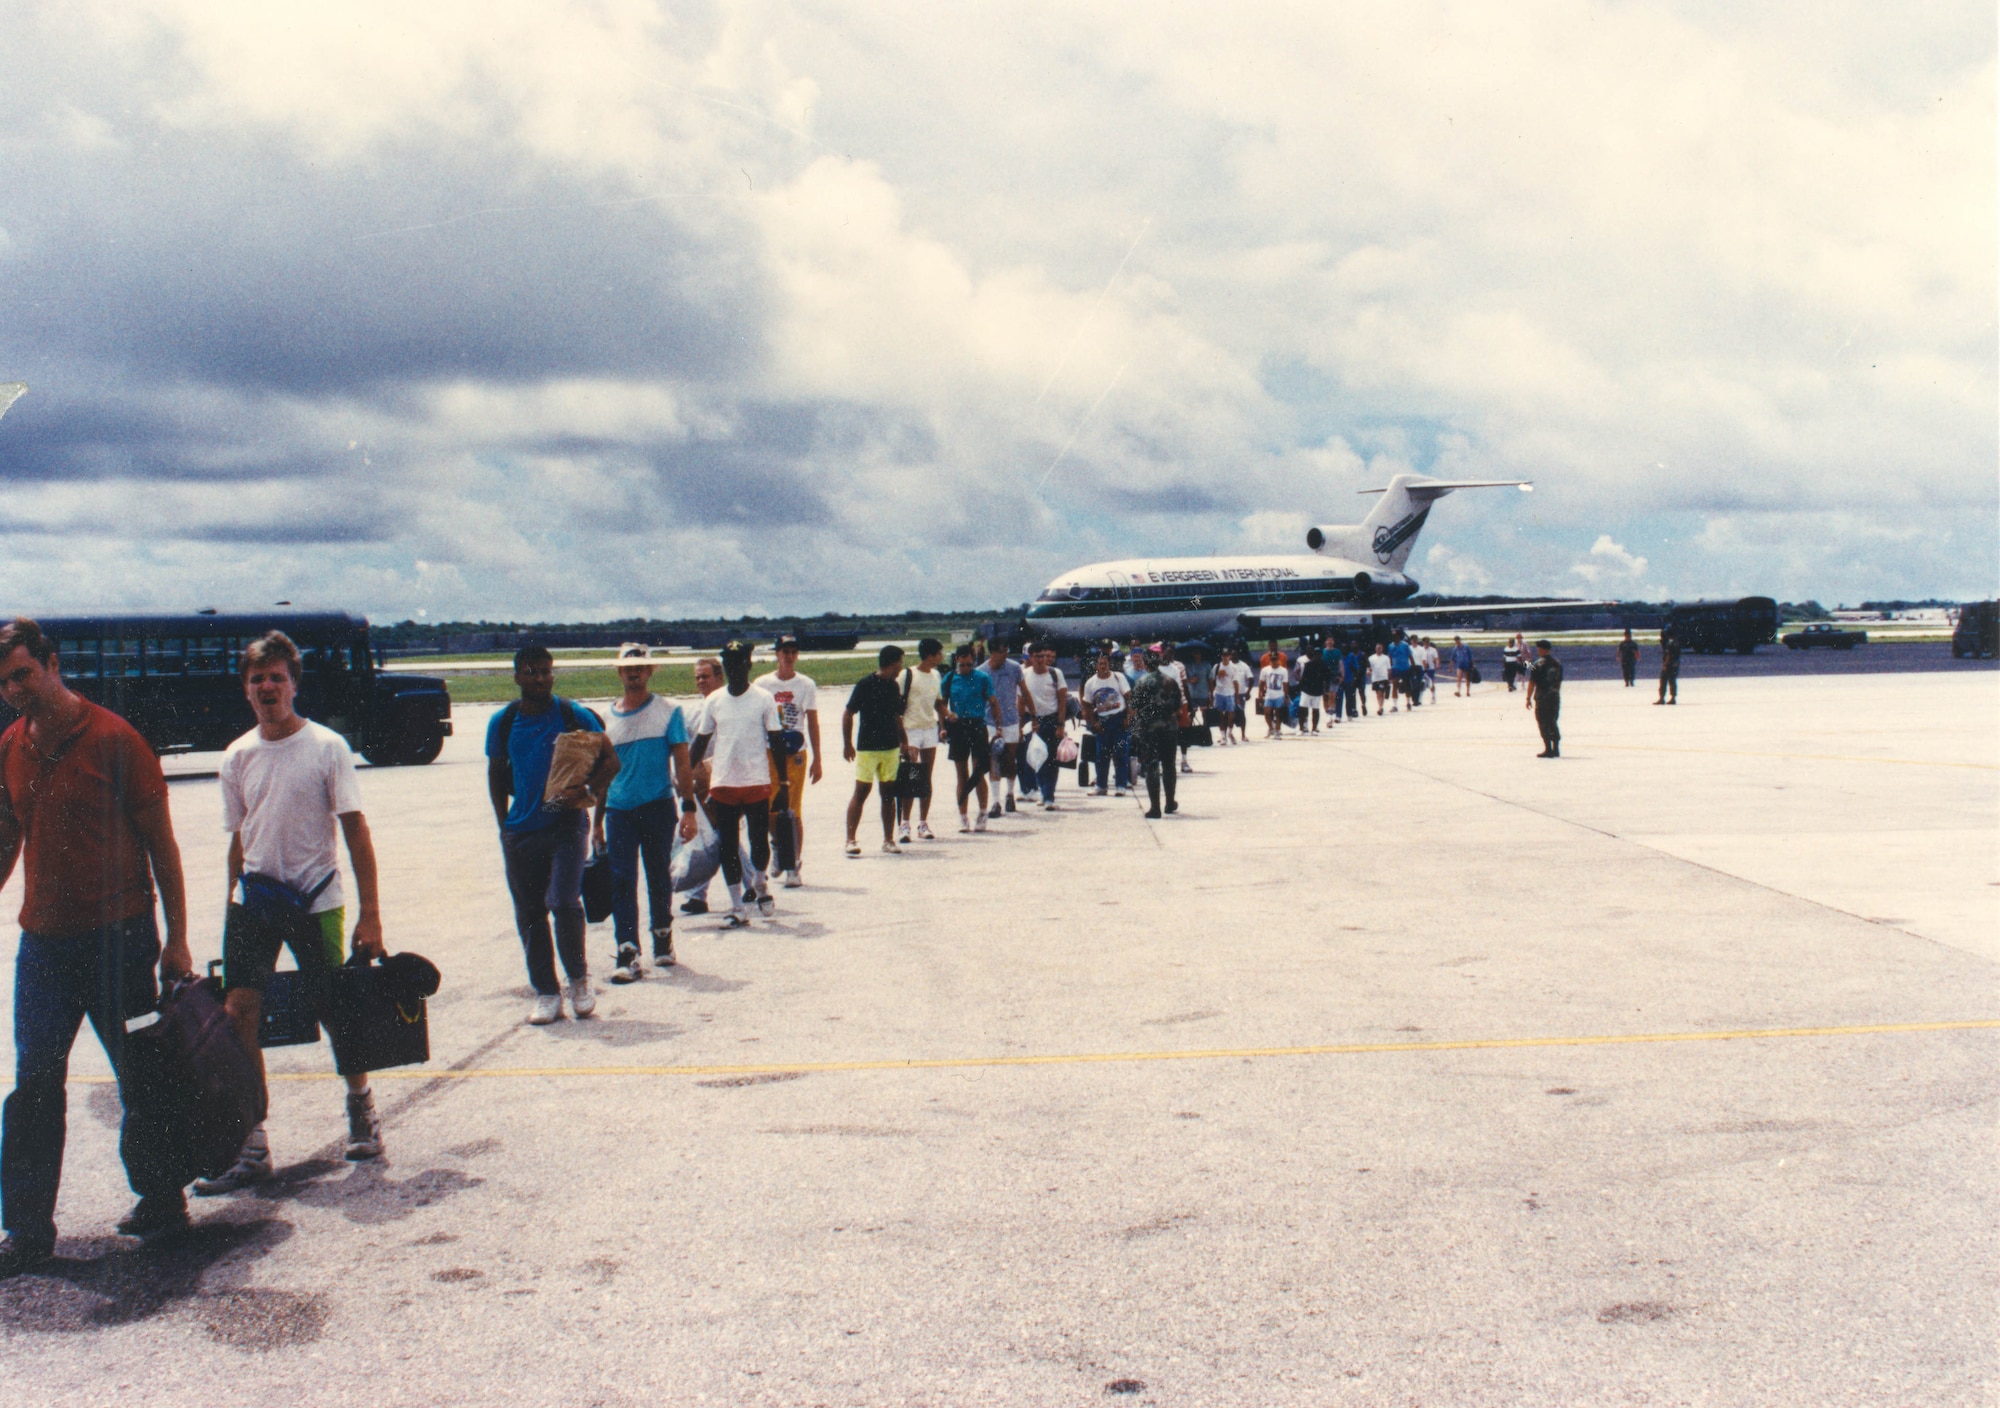 ANDERSEN AIR FORCE BASE, Guam - Refugees stream from chartered aircraft after evacuating Clark Air Base, Philippines, June 1991.  More than 21,000 refugees were flown to Andersen in less than one week.  The Military Airlift Command alone airlifted 15,000 passengers on 246 missions; the others came in on chartered flights.
(Courtesy photo).
